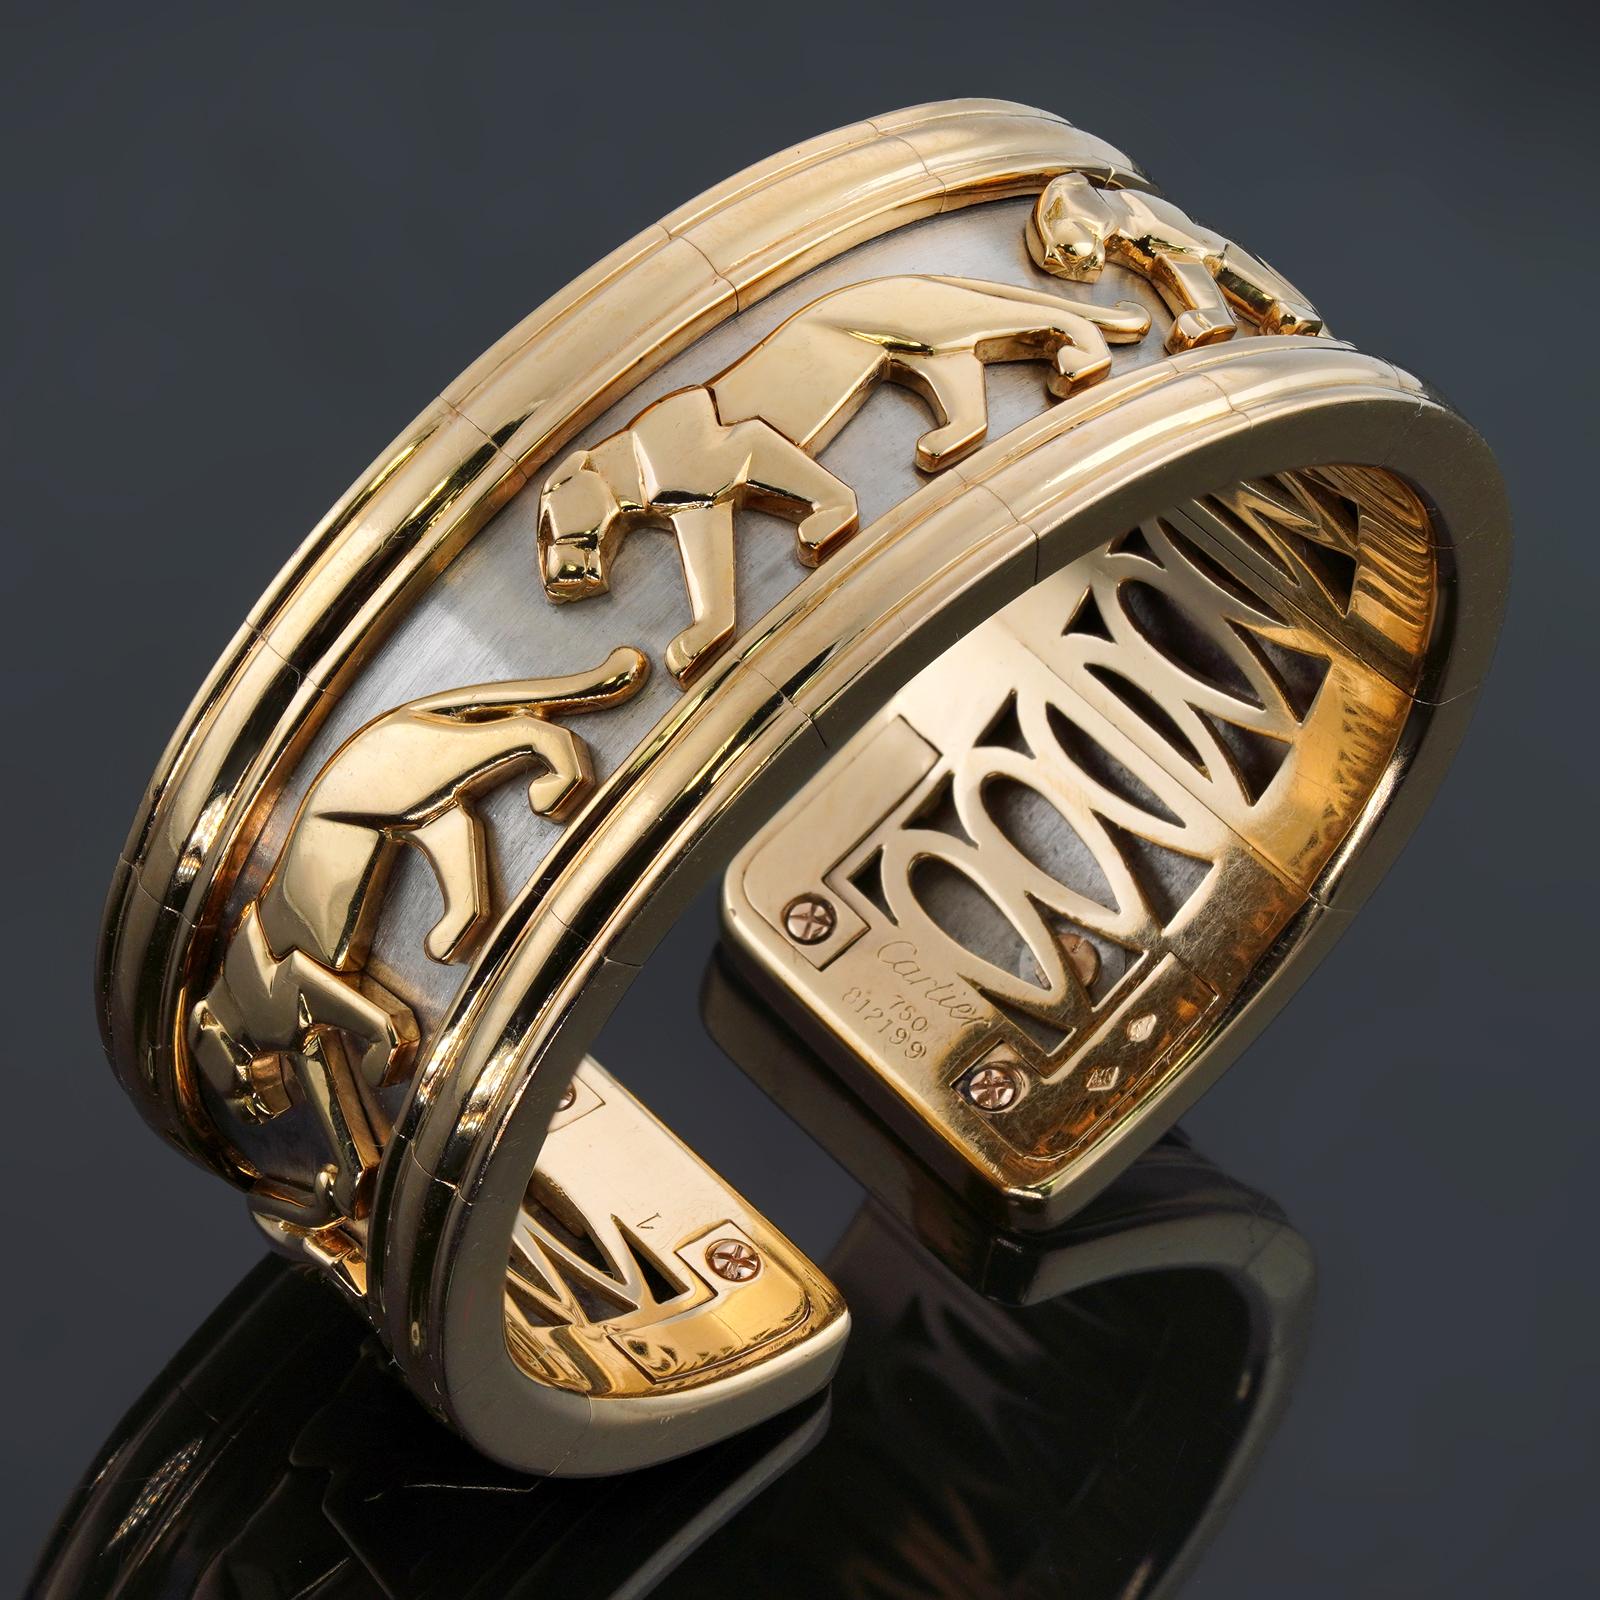 This gorgeous vintage Cartier Panthere bracelet features a classic design of running panthers crafted in  18 kt. yellow and white gold, signed Cartier, with maker's mark and French assay mark. The size of this bracelet is slightly flexible with an